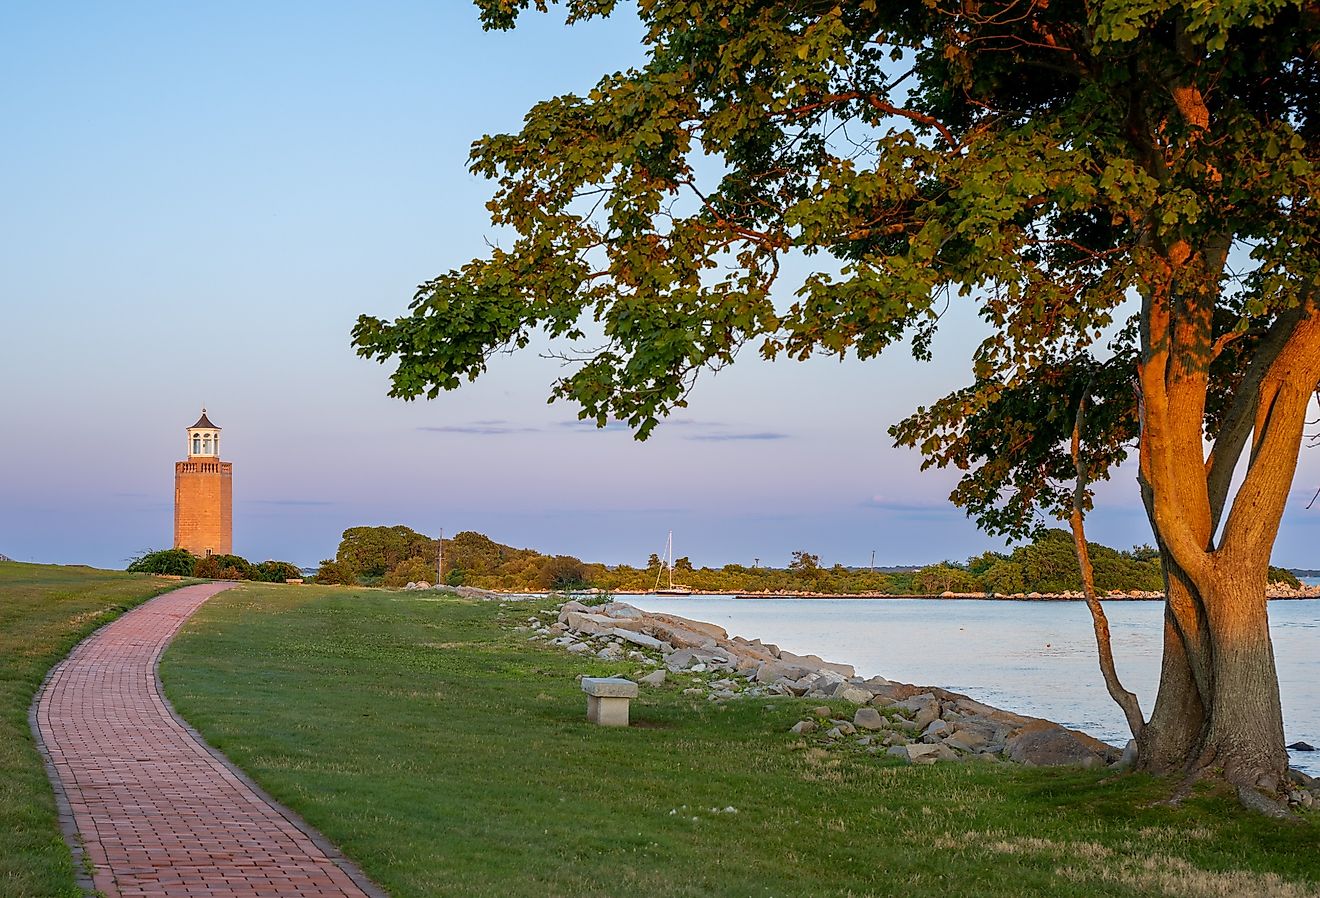 Avery Point Lighthouse in Groton, Connecticut, at sunset.